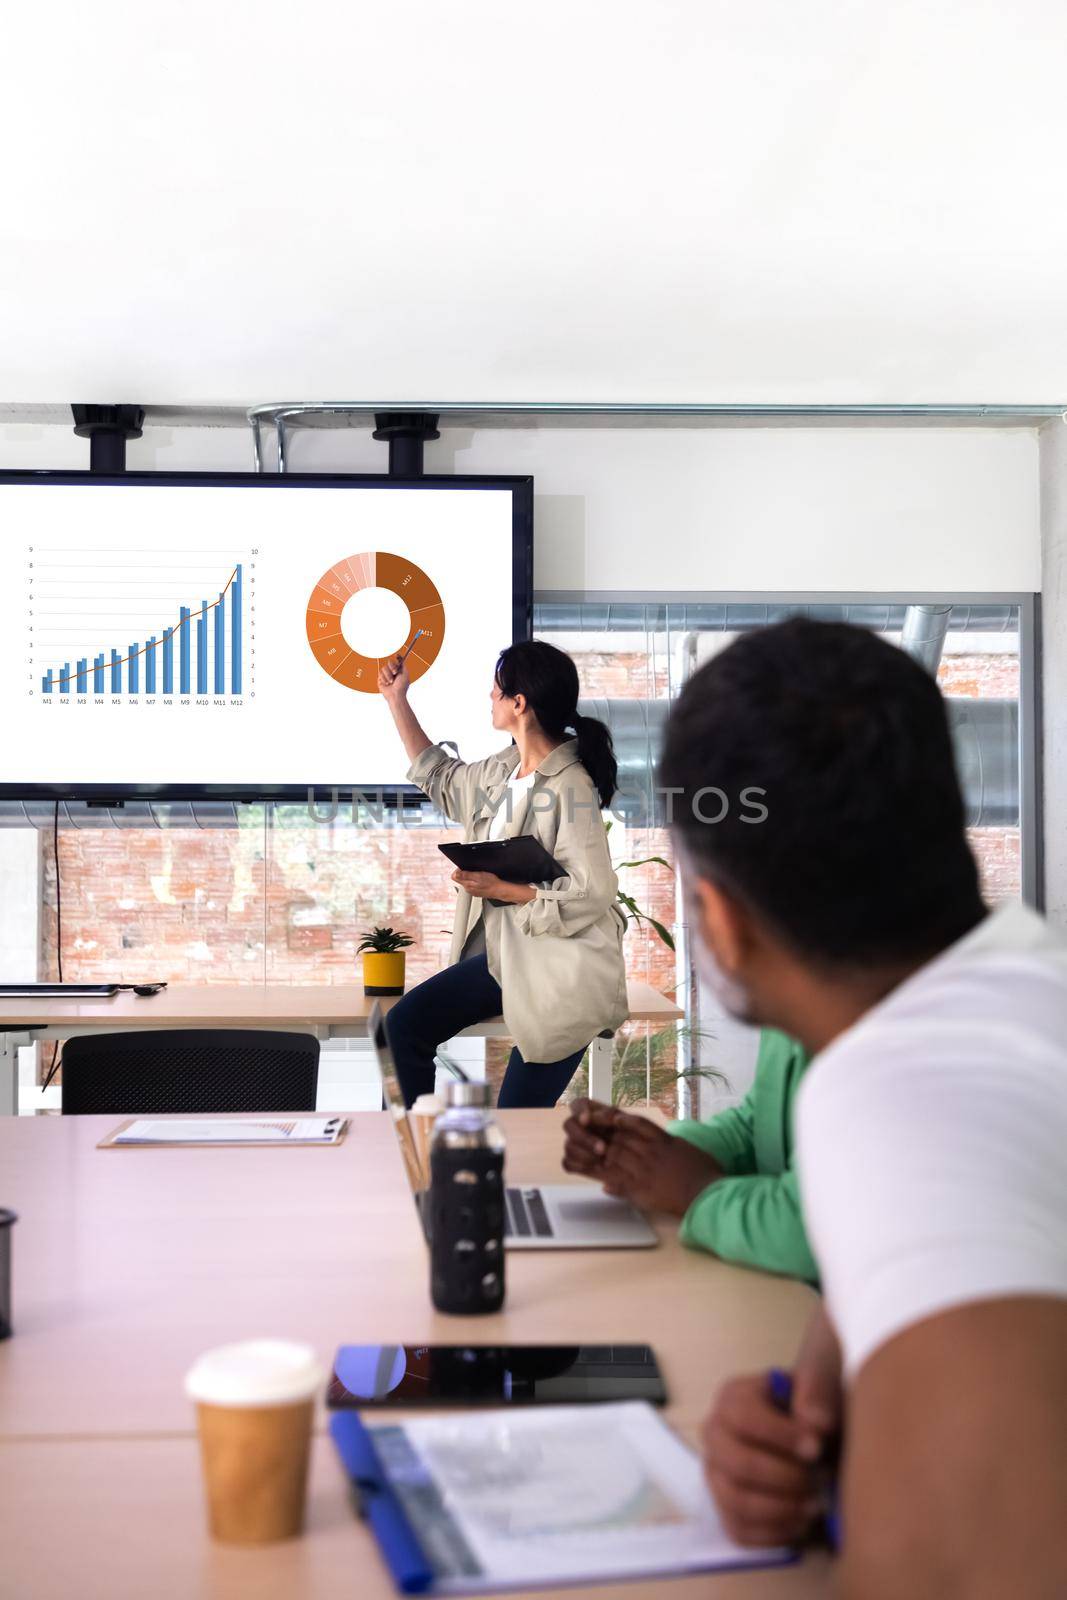 Team business meeting. Female boss looking at company results graphics. Vertical image. Business concept.